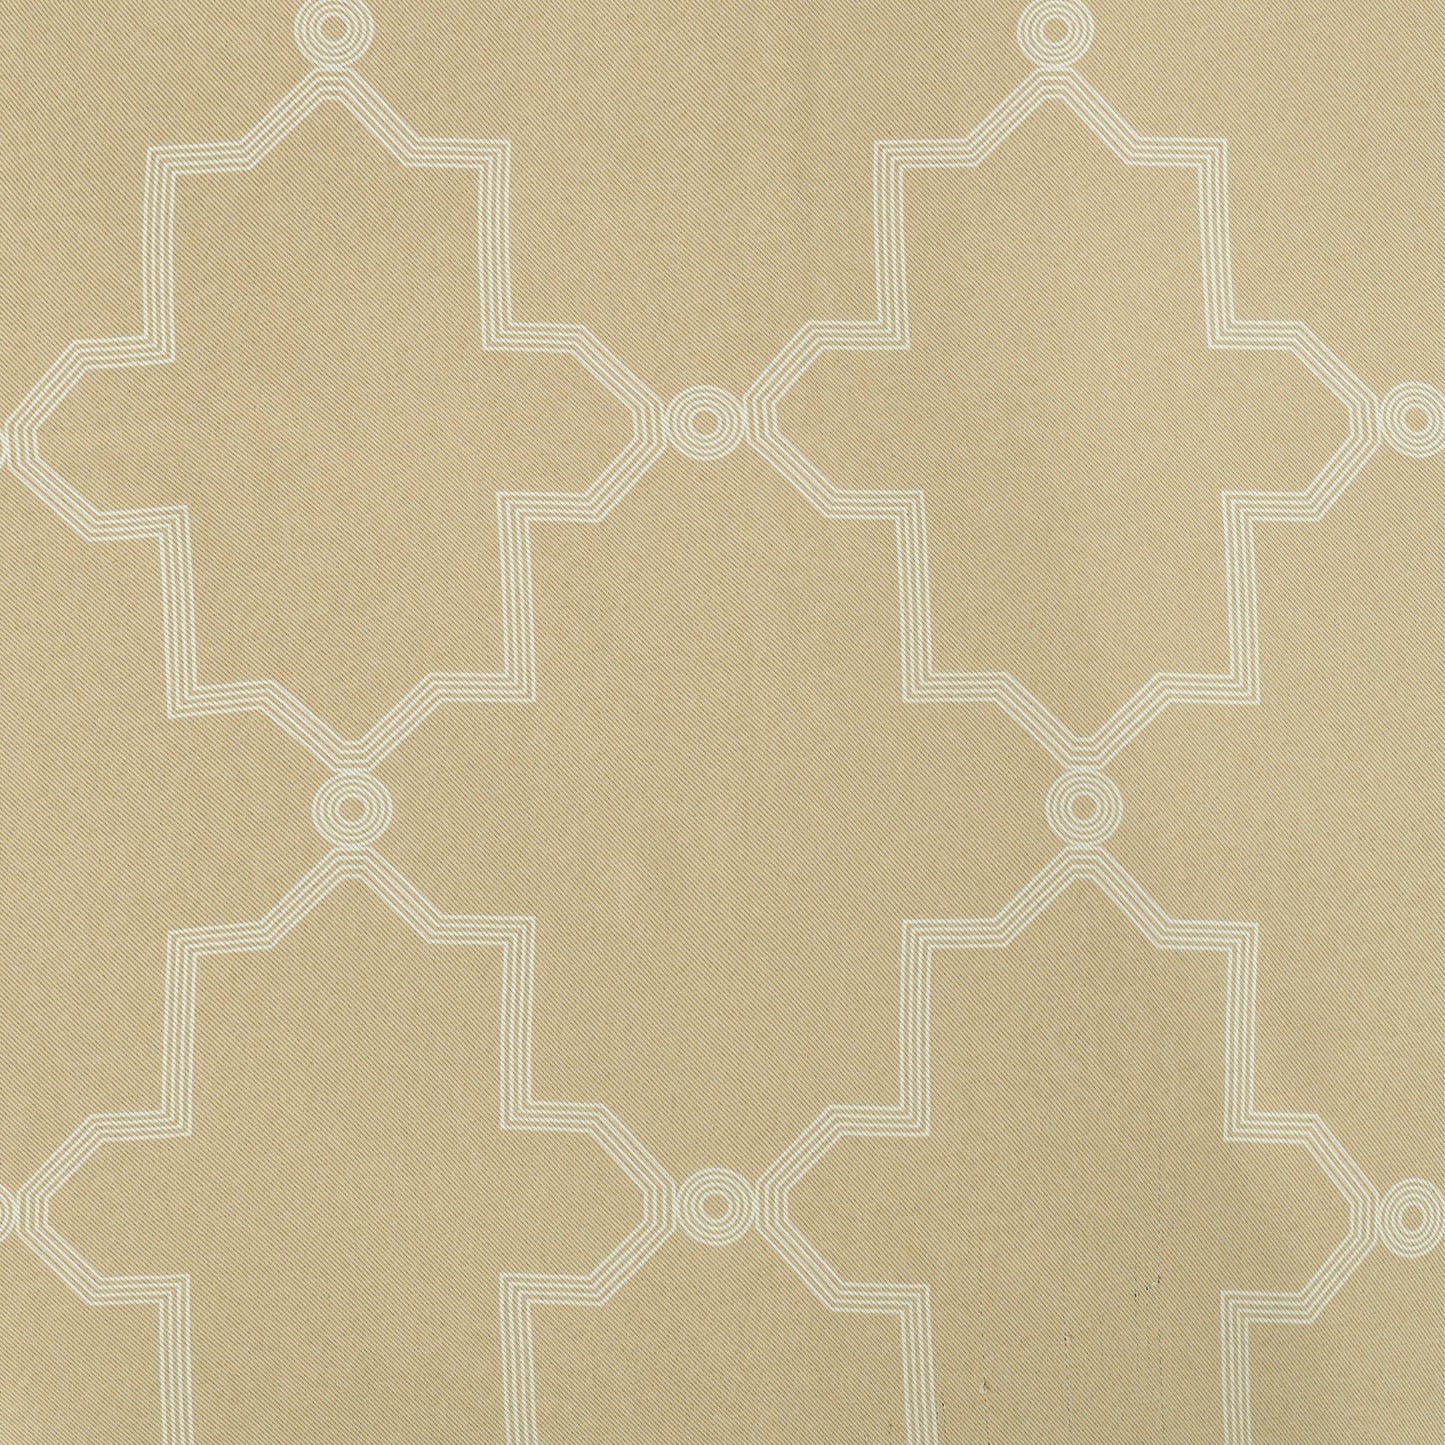 Imperial Trellis Blackout 2 Panel Curtains FredCo